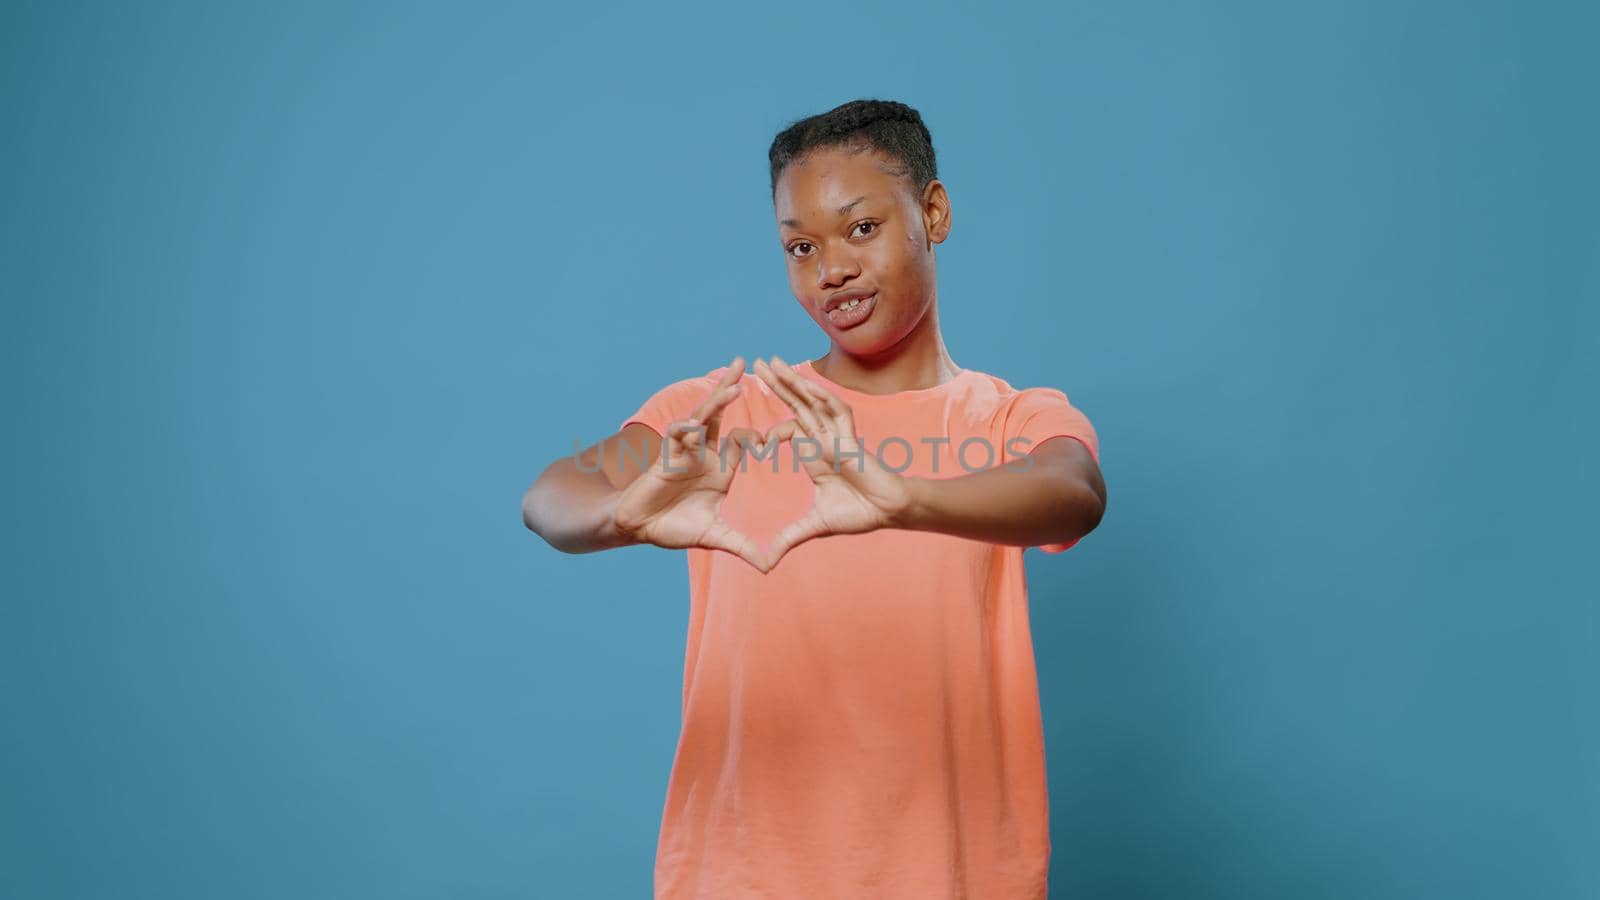 Young woman doing heart shape symbol with hands by DCStudio